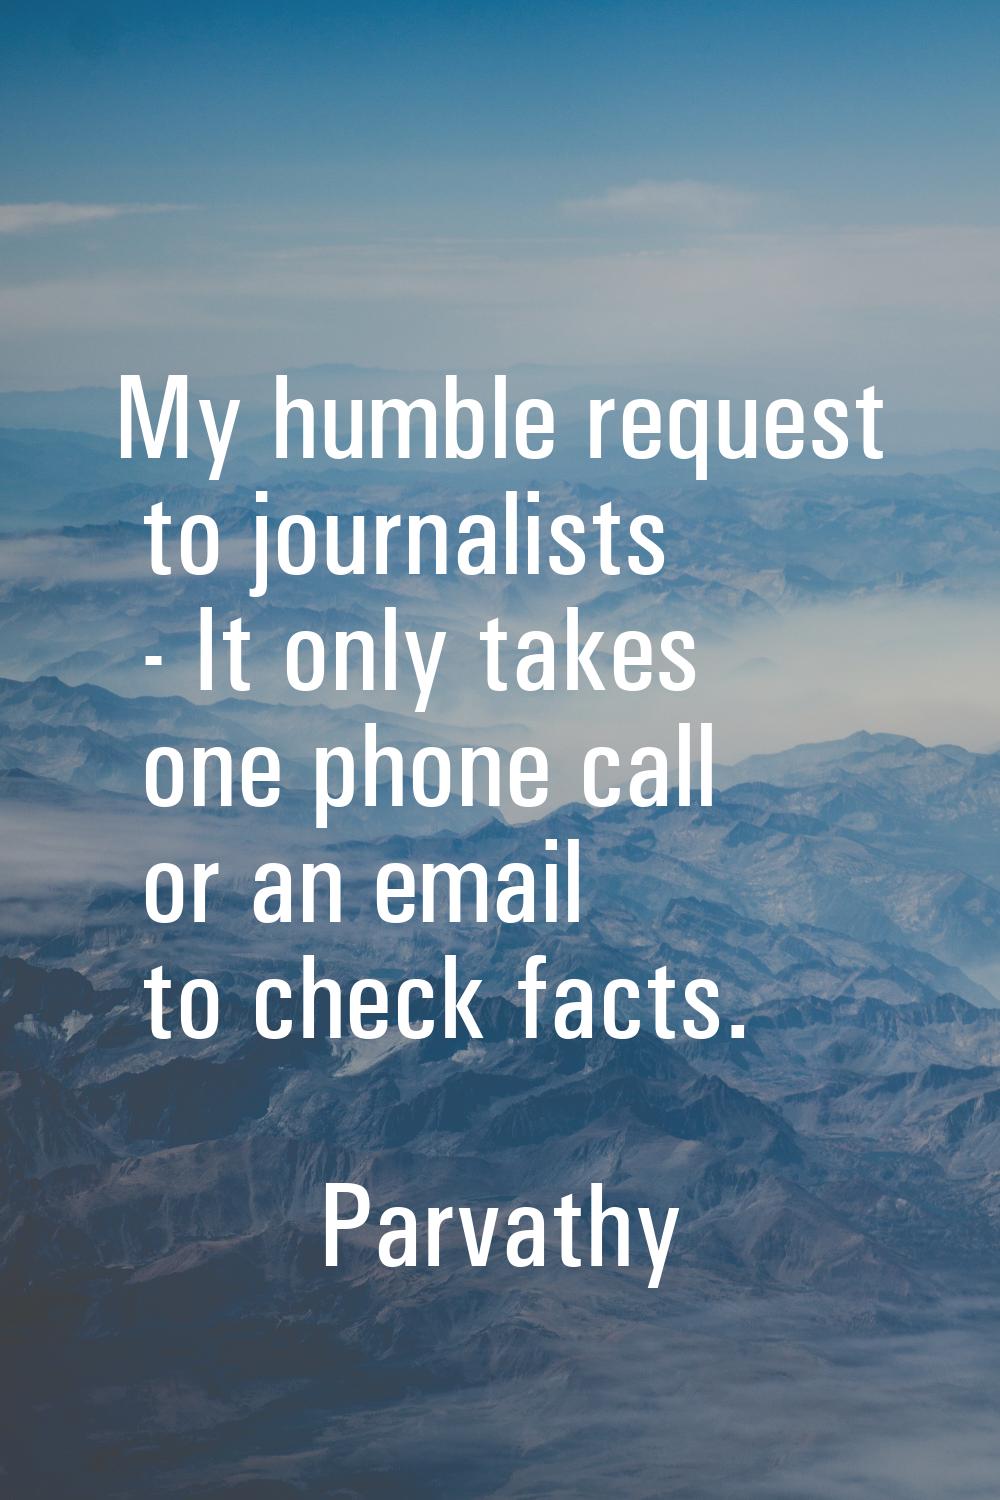 My humble request to journalists - It only takes one phone call or an email to check facts.